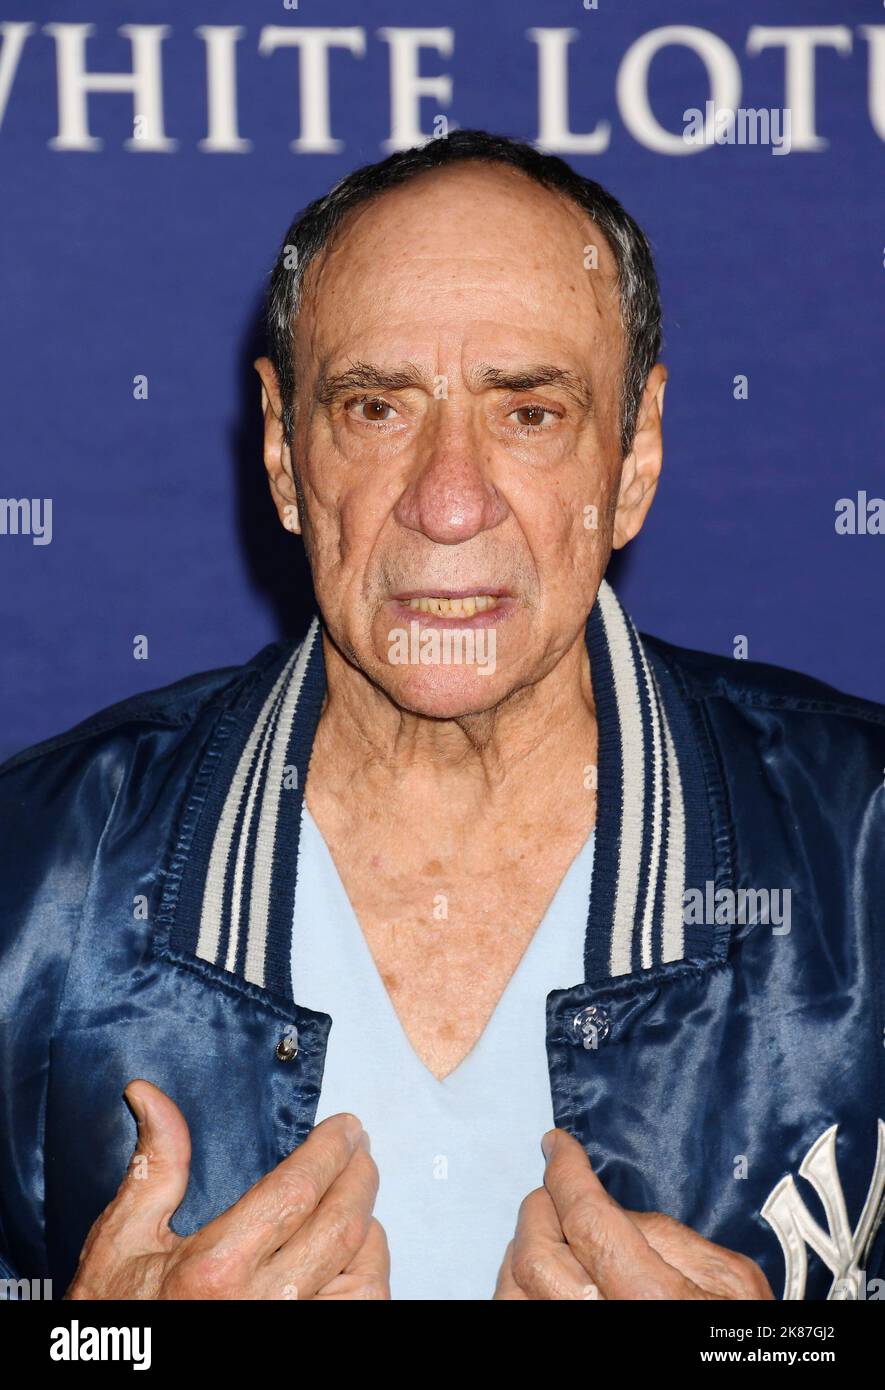 Los Angeles, USA. 20th Oct, 2022. F. Murray Abraham attends the Los Angeles Season 2 Premiere of HBO Original Series 'The White Lotus' at Goya Studios on October 20, 2022 in Los Angeles, California. Credit: Jeffrey Mayer/Jtm Photos/Media Punch/Alamy Live News Stock Photo